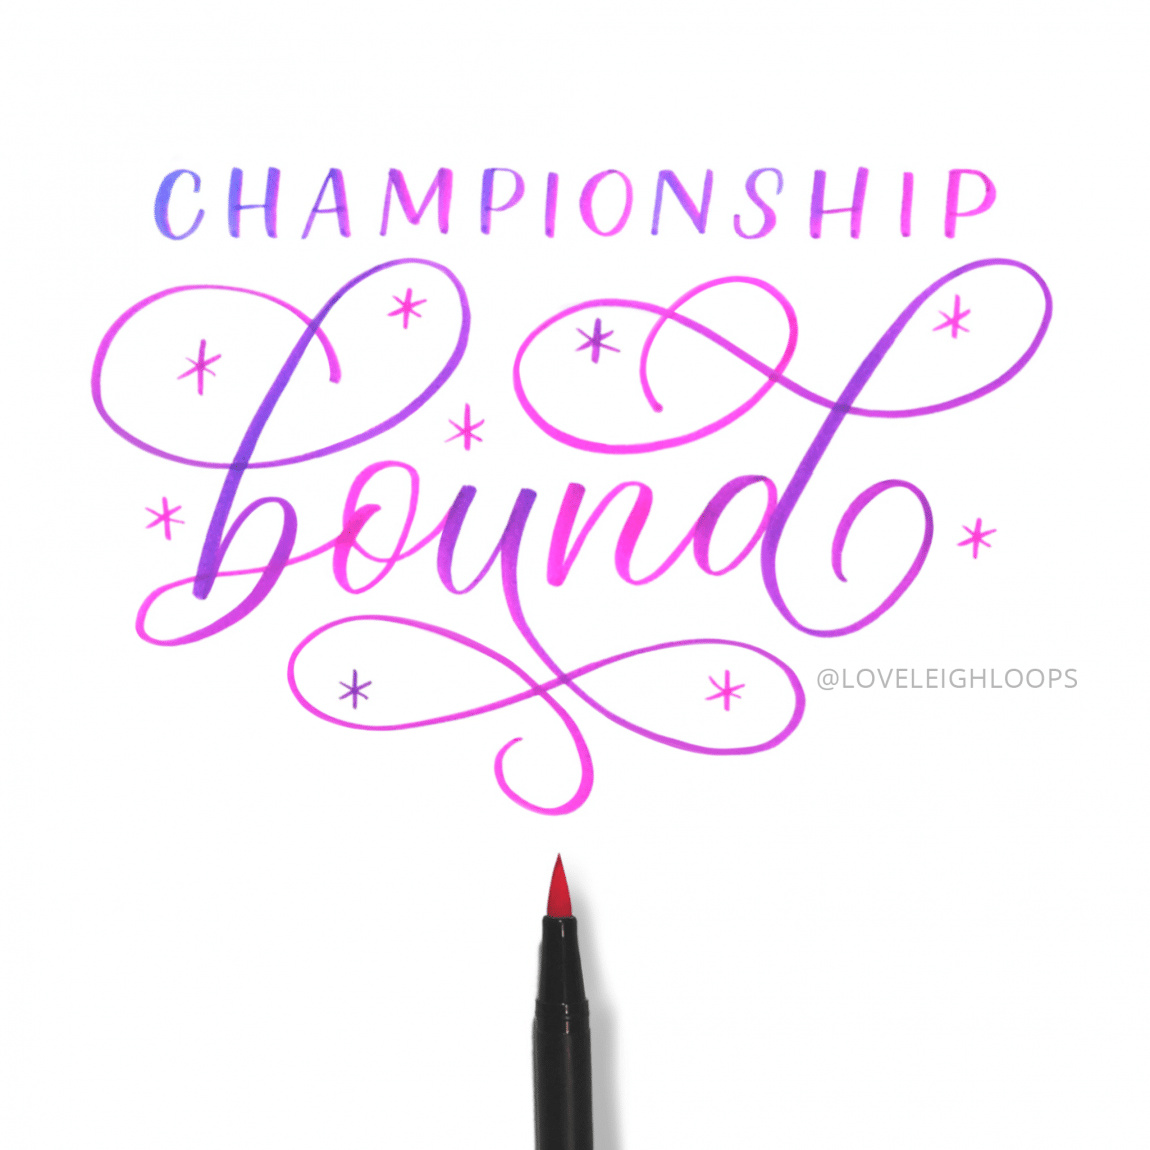 The ULTIMATE brush lettering guide for beginners - Lettering Daily